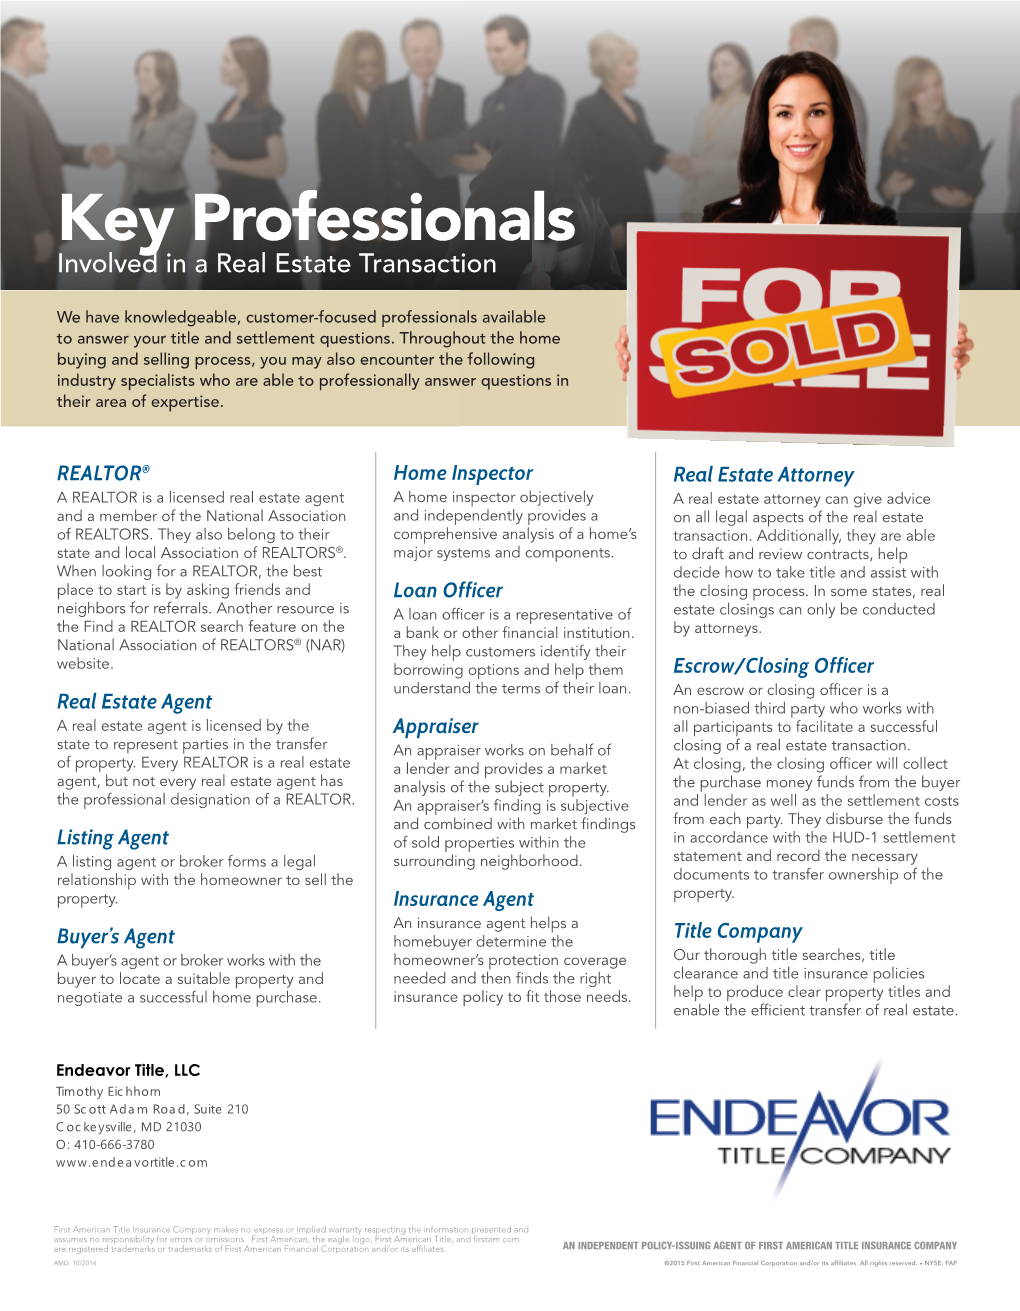 Key Professionals Involved in a Real Estate Transaction